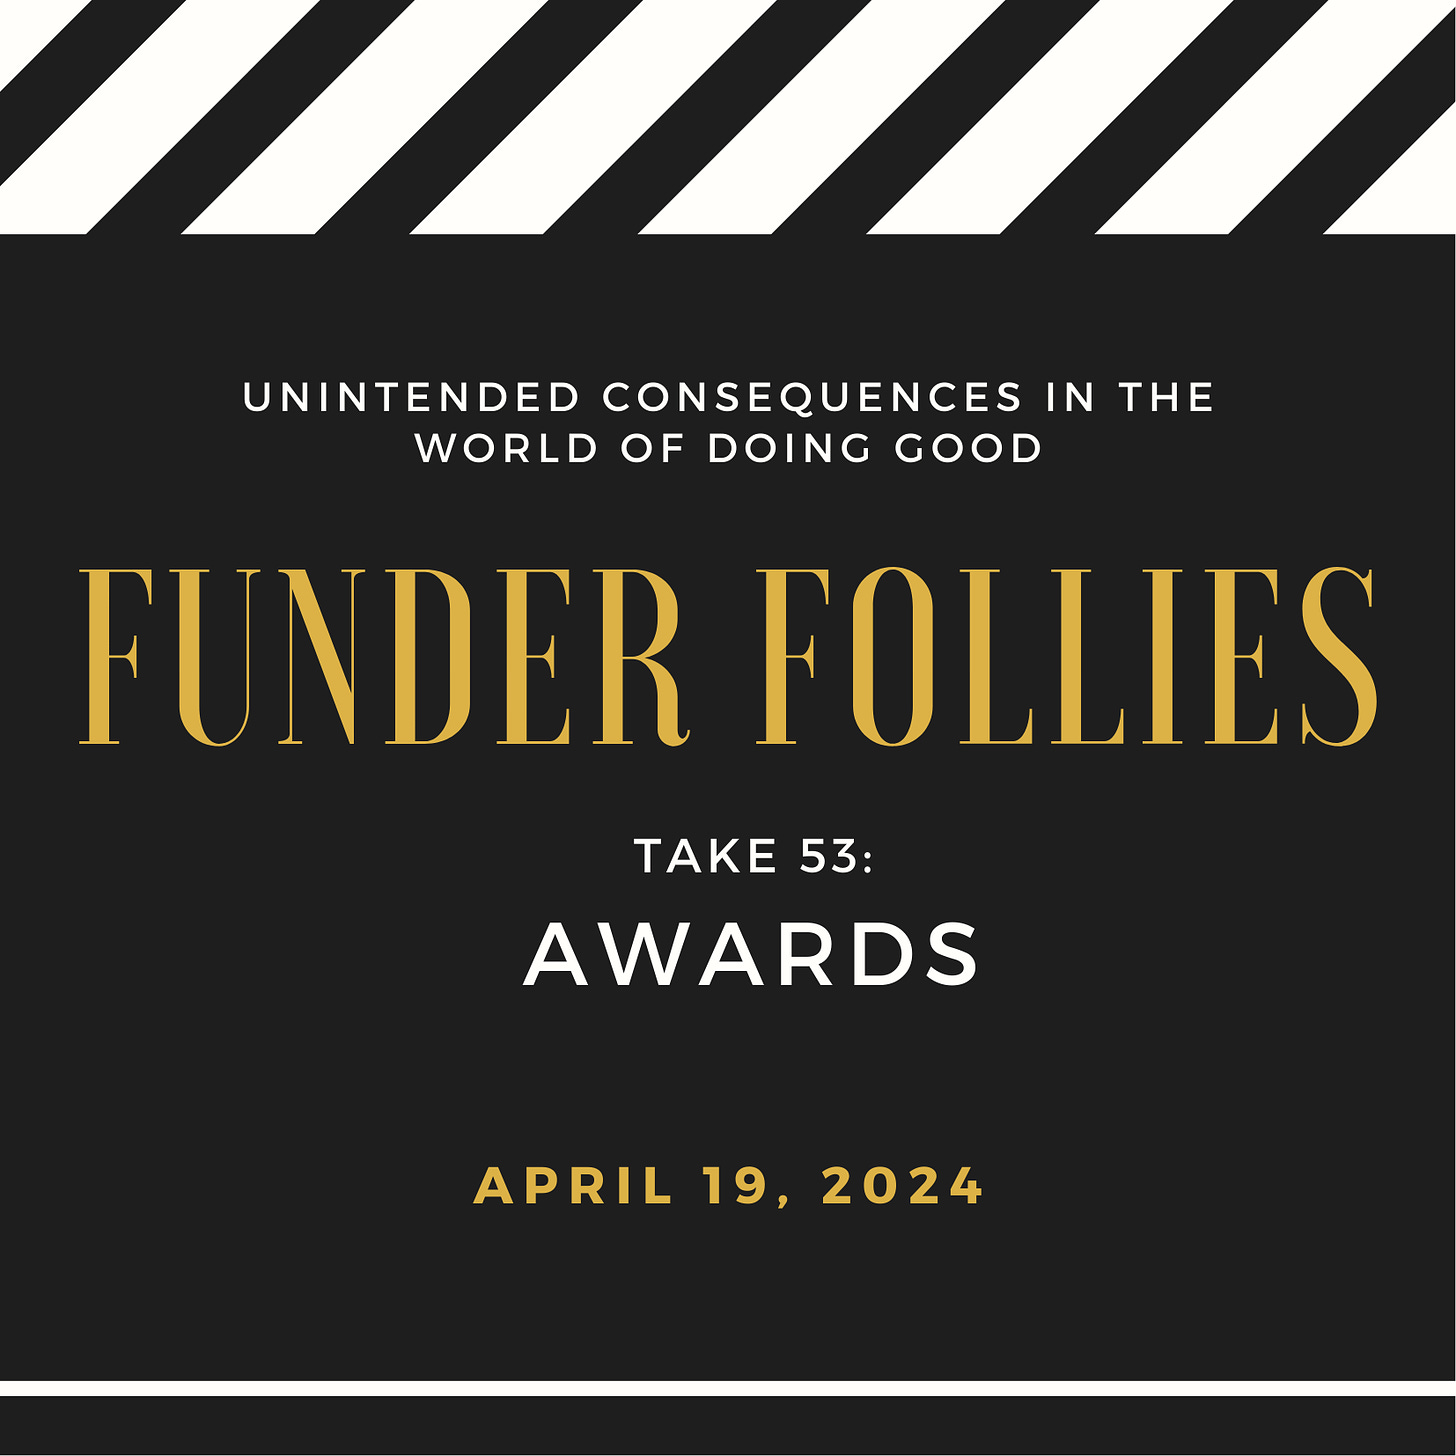 black and white film clapper board showing Funder Follies, Unintended Consequences of Doing Good, Take #53: Awards, April 19, 2024